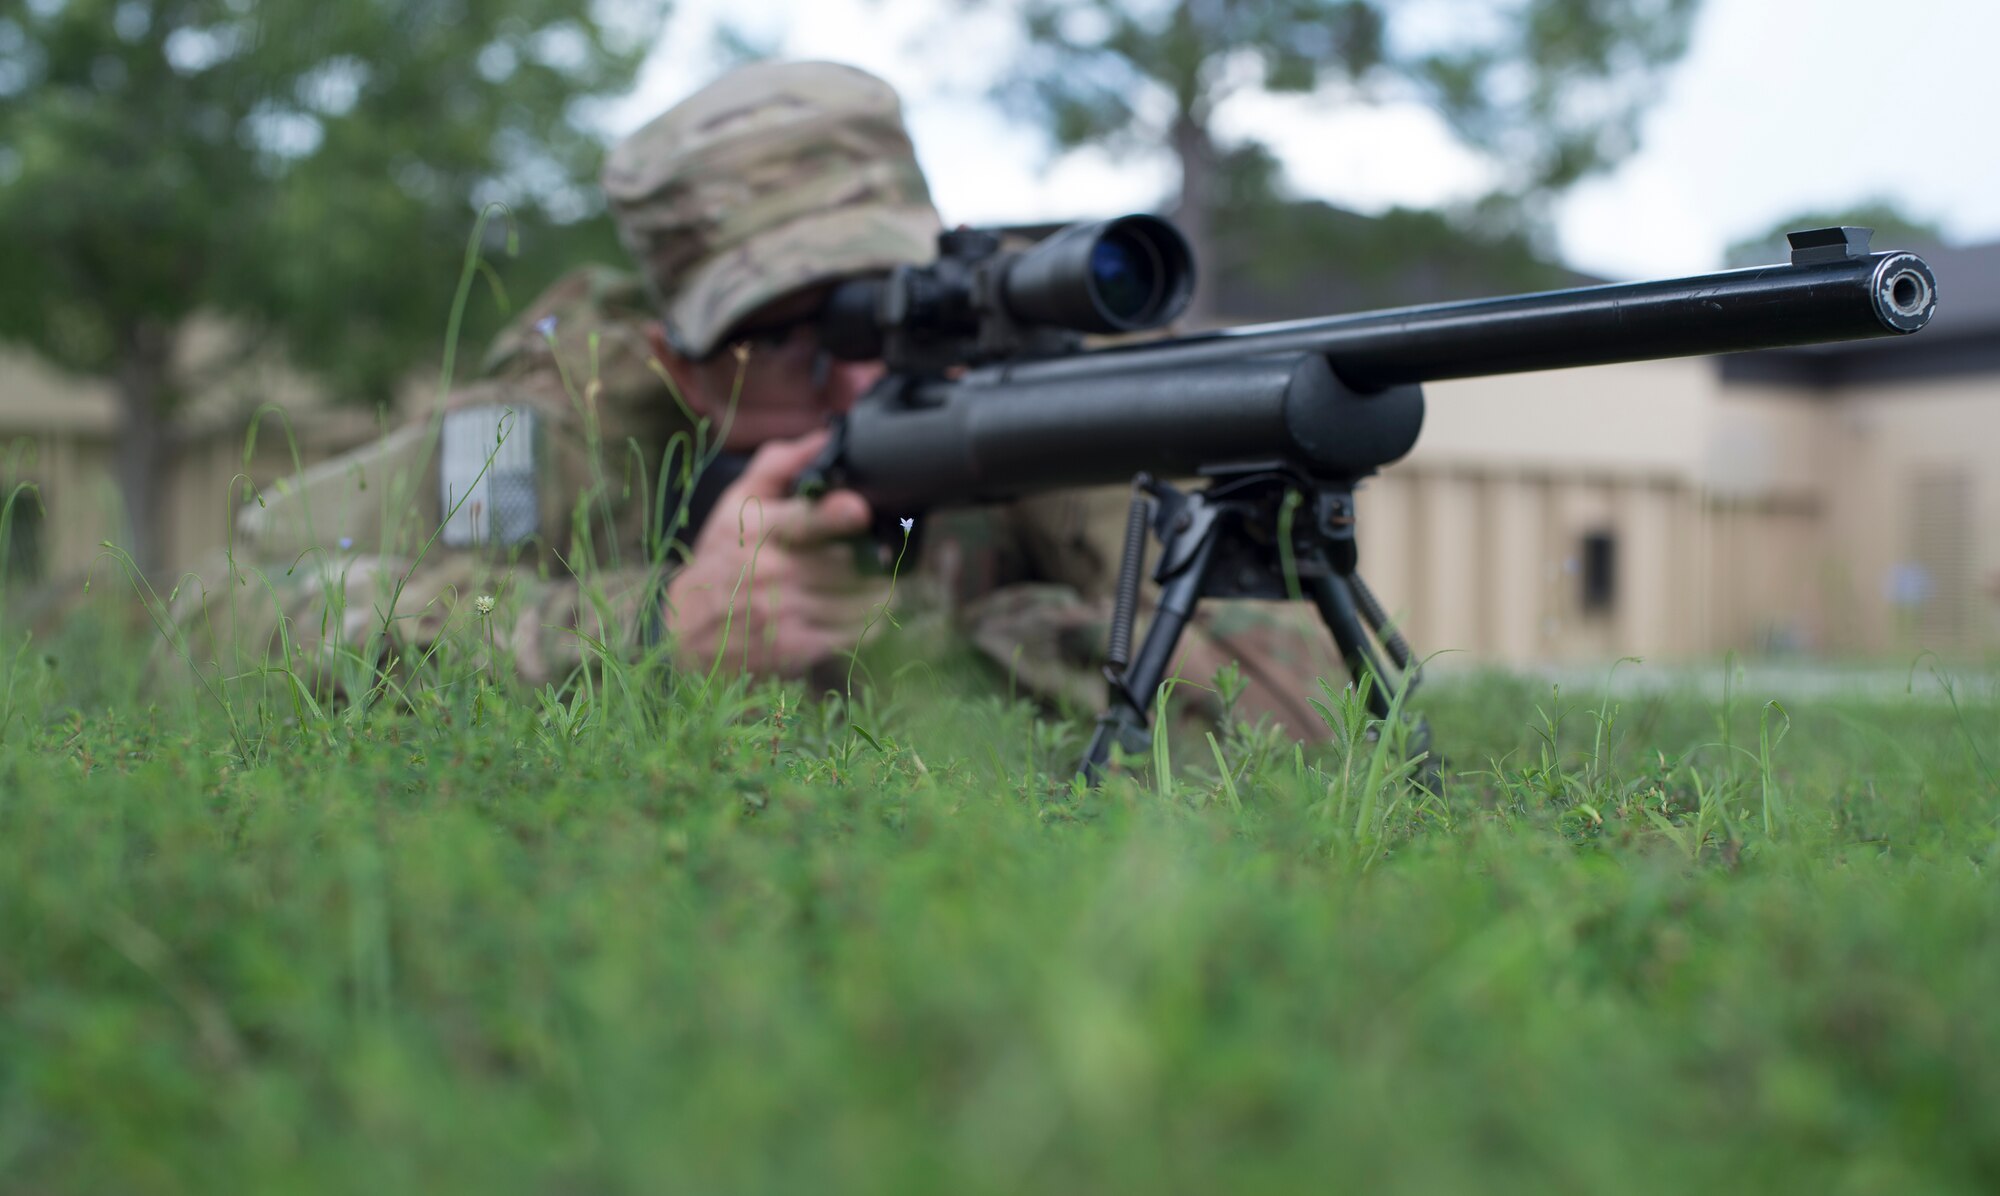 U.S. Air Force Staff Sgt. Joseph Crotty, 822d Base Defense Squadron NCO in charge of standards and evaluations, gazes down the sights of his M24 Sniper Weapon System while in the prone position July 2, 2015, at Moody Air Force Base, Ga. Crotty and Senior Airman Phillip Hopkins, 822d Base Defense Squadron fireteam leader, attended a nine-week sniper training course to develop their knowledge and skills. (U.S. Air Force photo by Staff Sgt. Eric Summers Jr./Released)